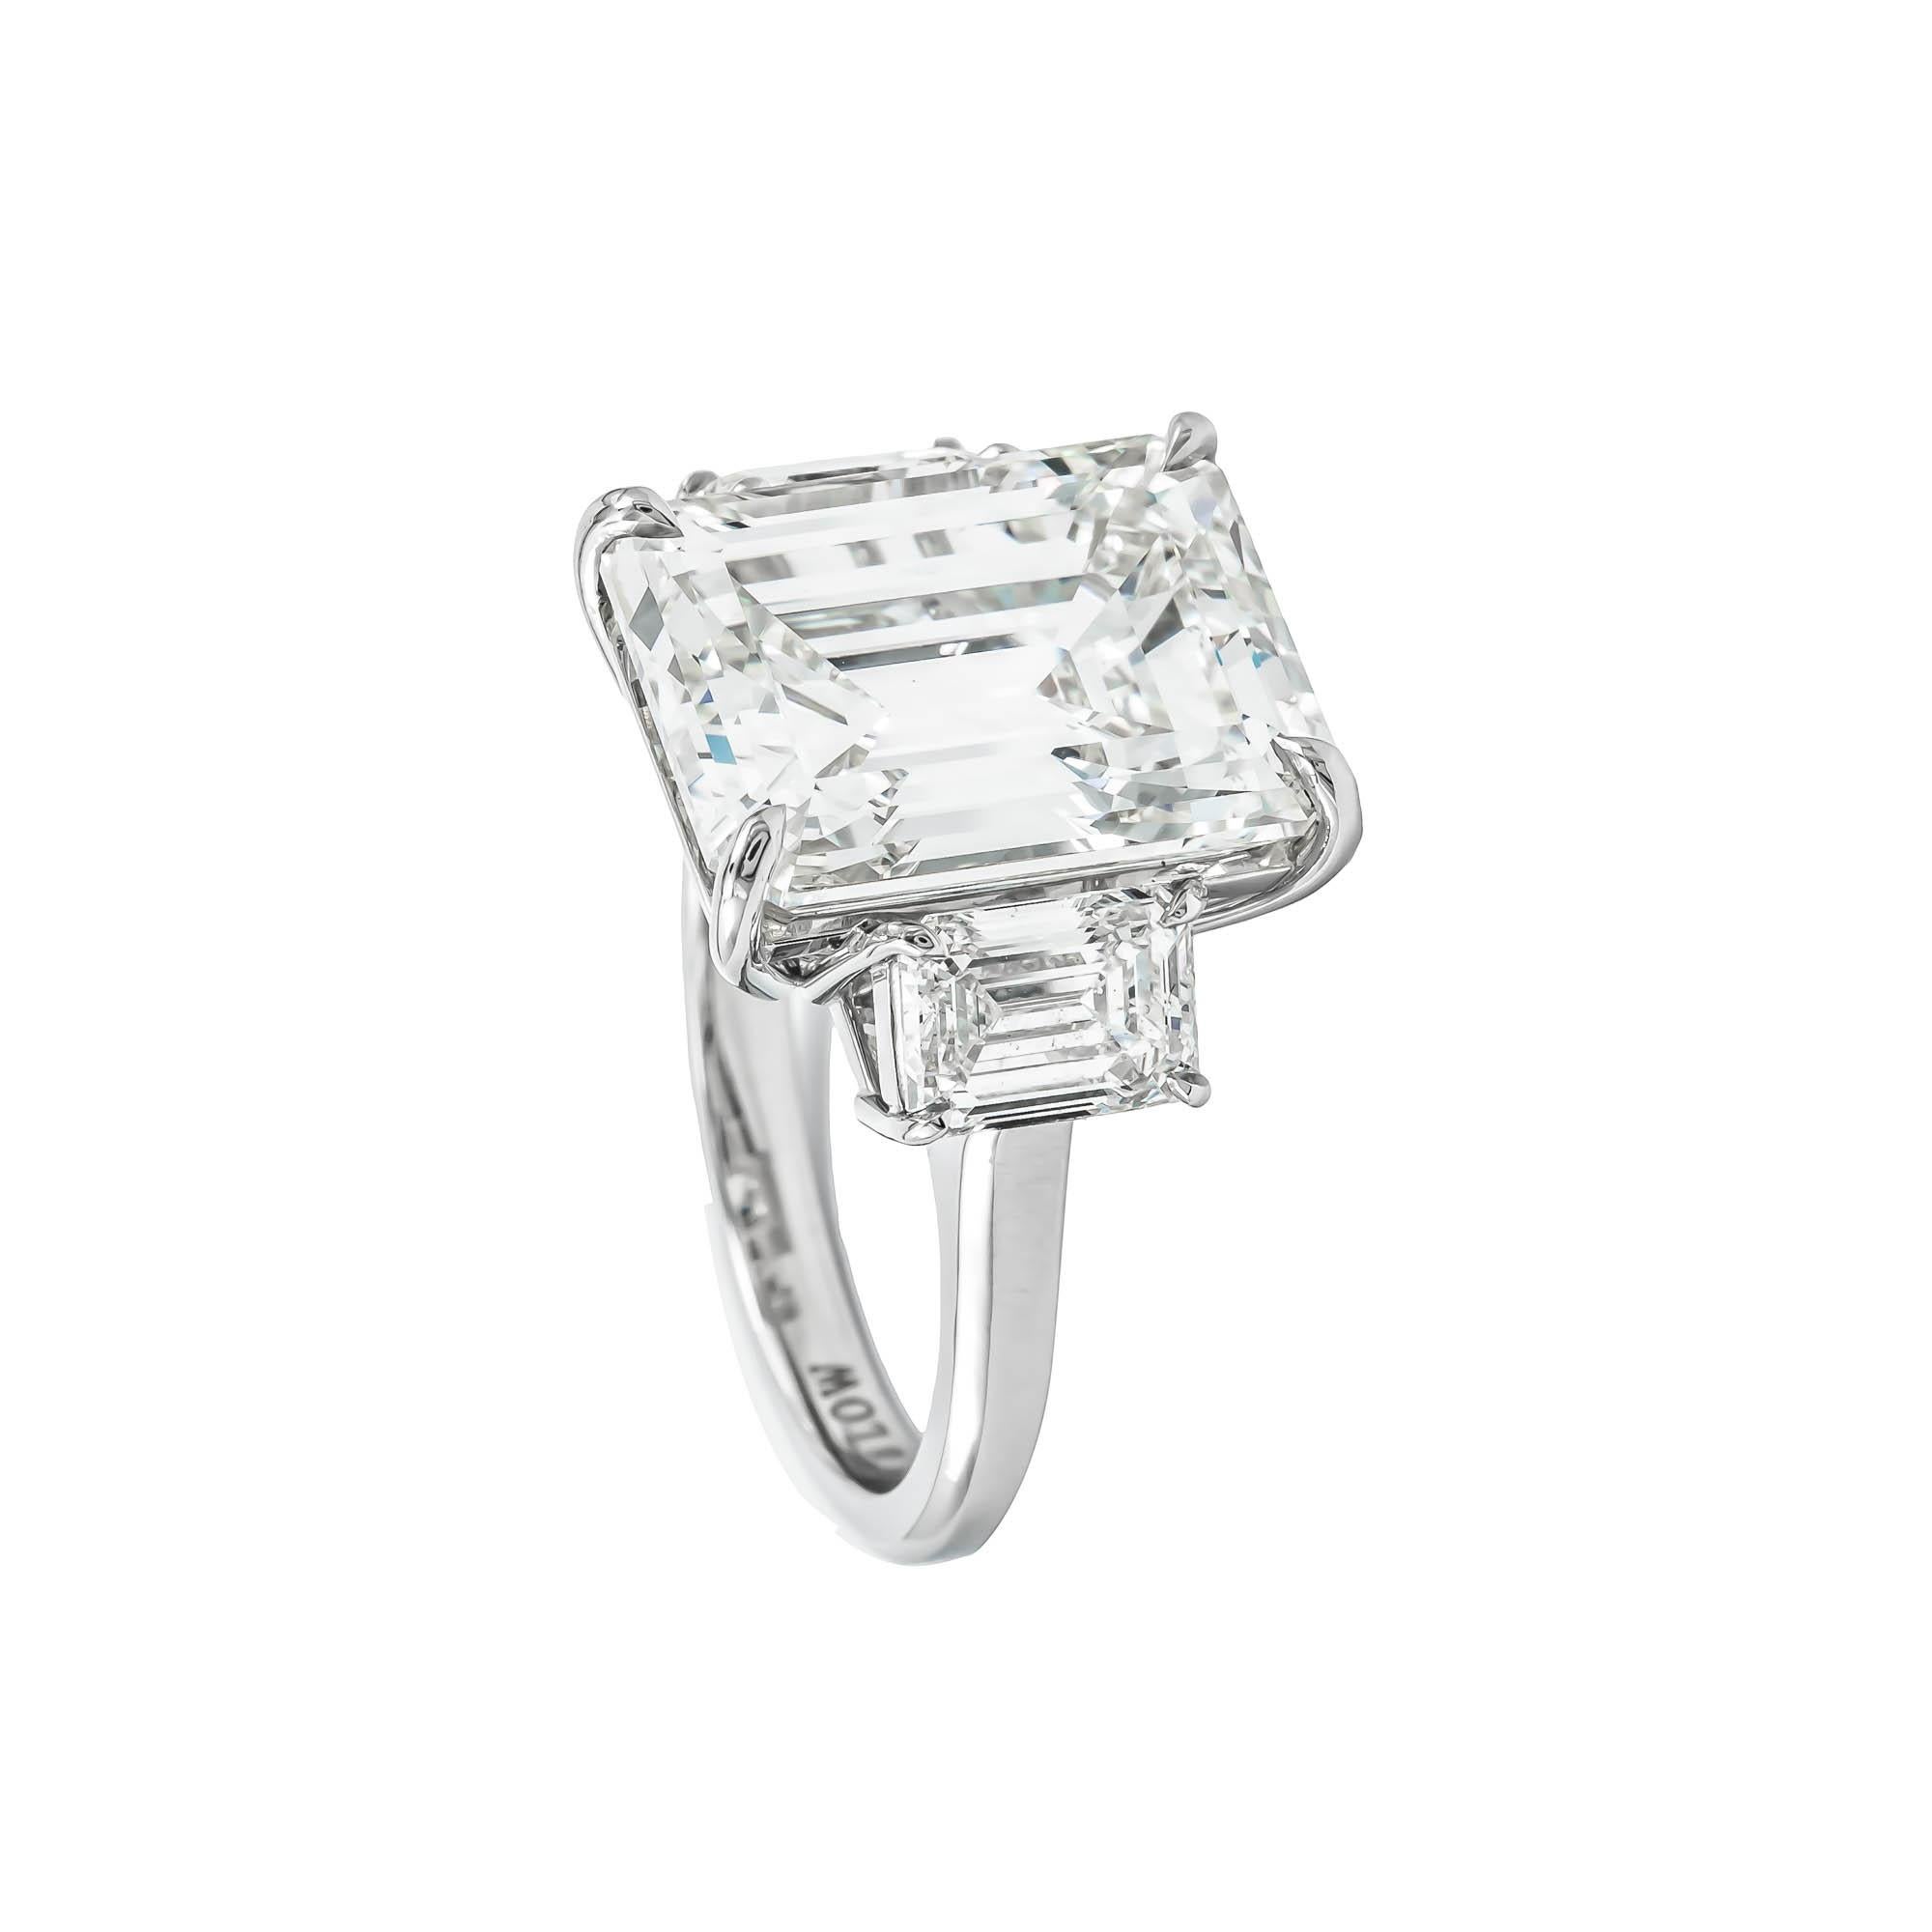 Platinum custom made Emerald Cut Diamond three stone ring. Consisting of one center Diamond weighing  10.75 Carat Emerald Cut Diamond with a color and clarity grade of K VS 2 GIA #6197826516 measurements 14.35 x 11.08 x 7.43 mm, flanked by 2